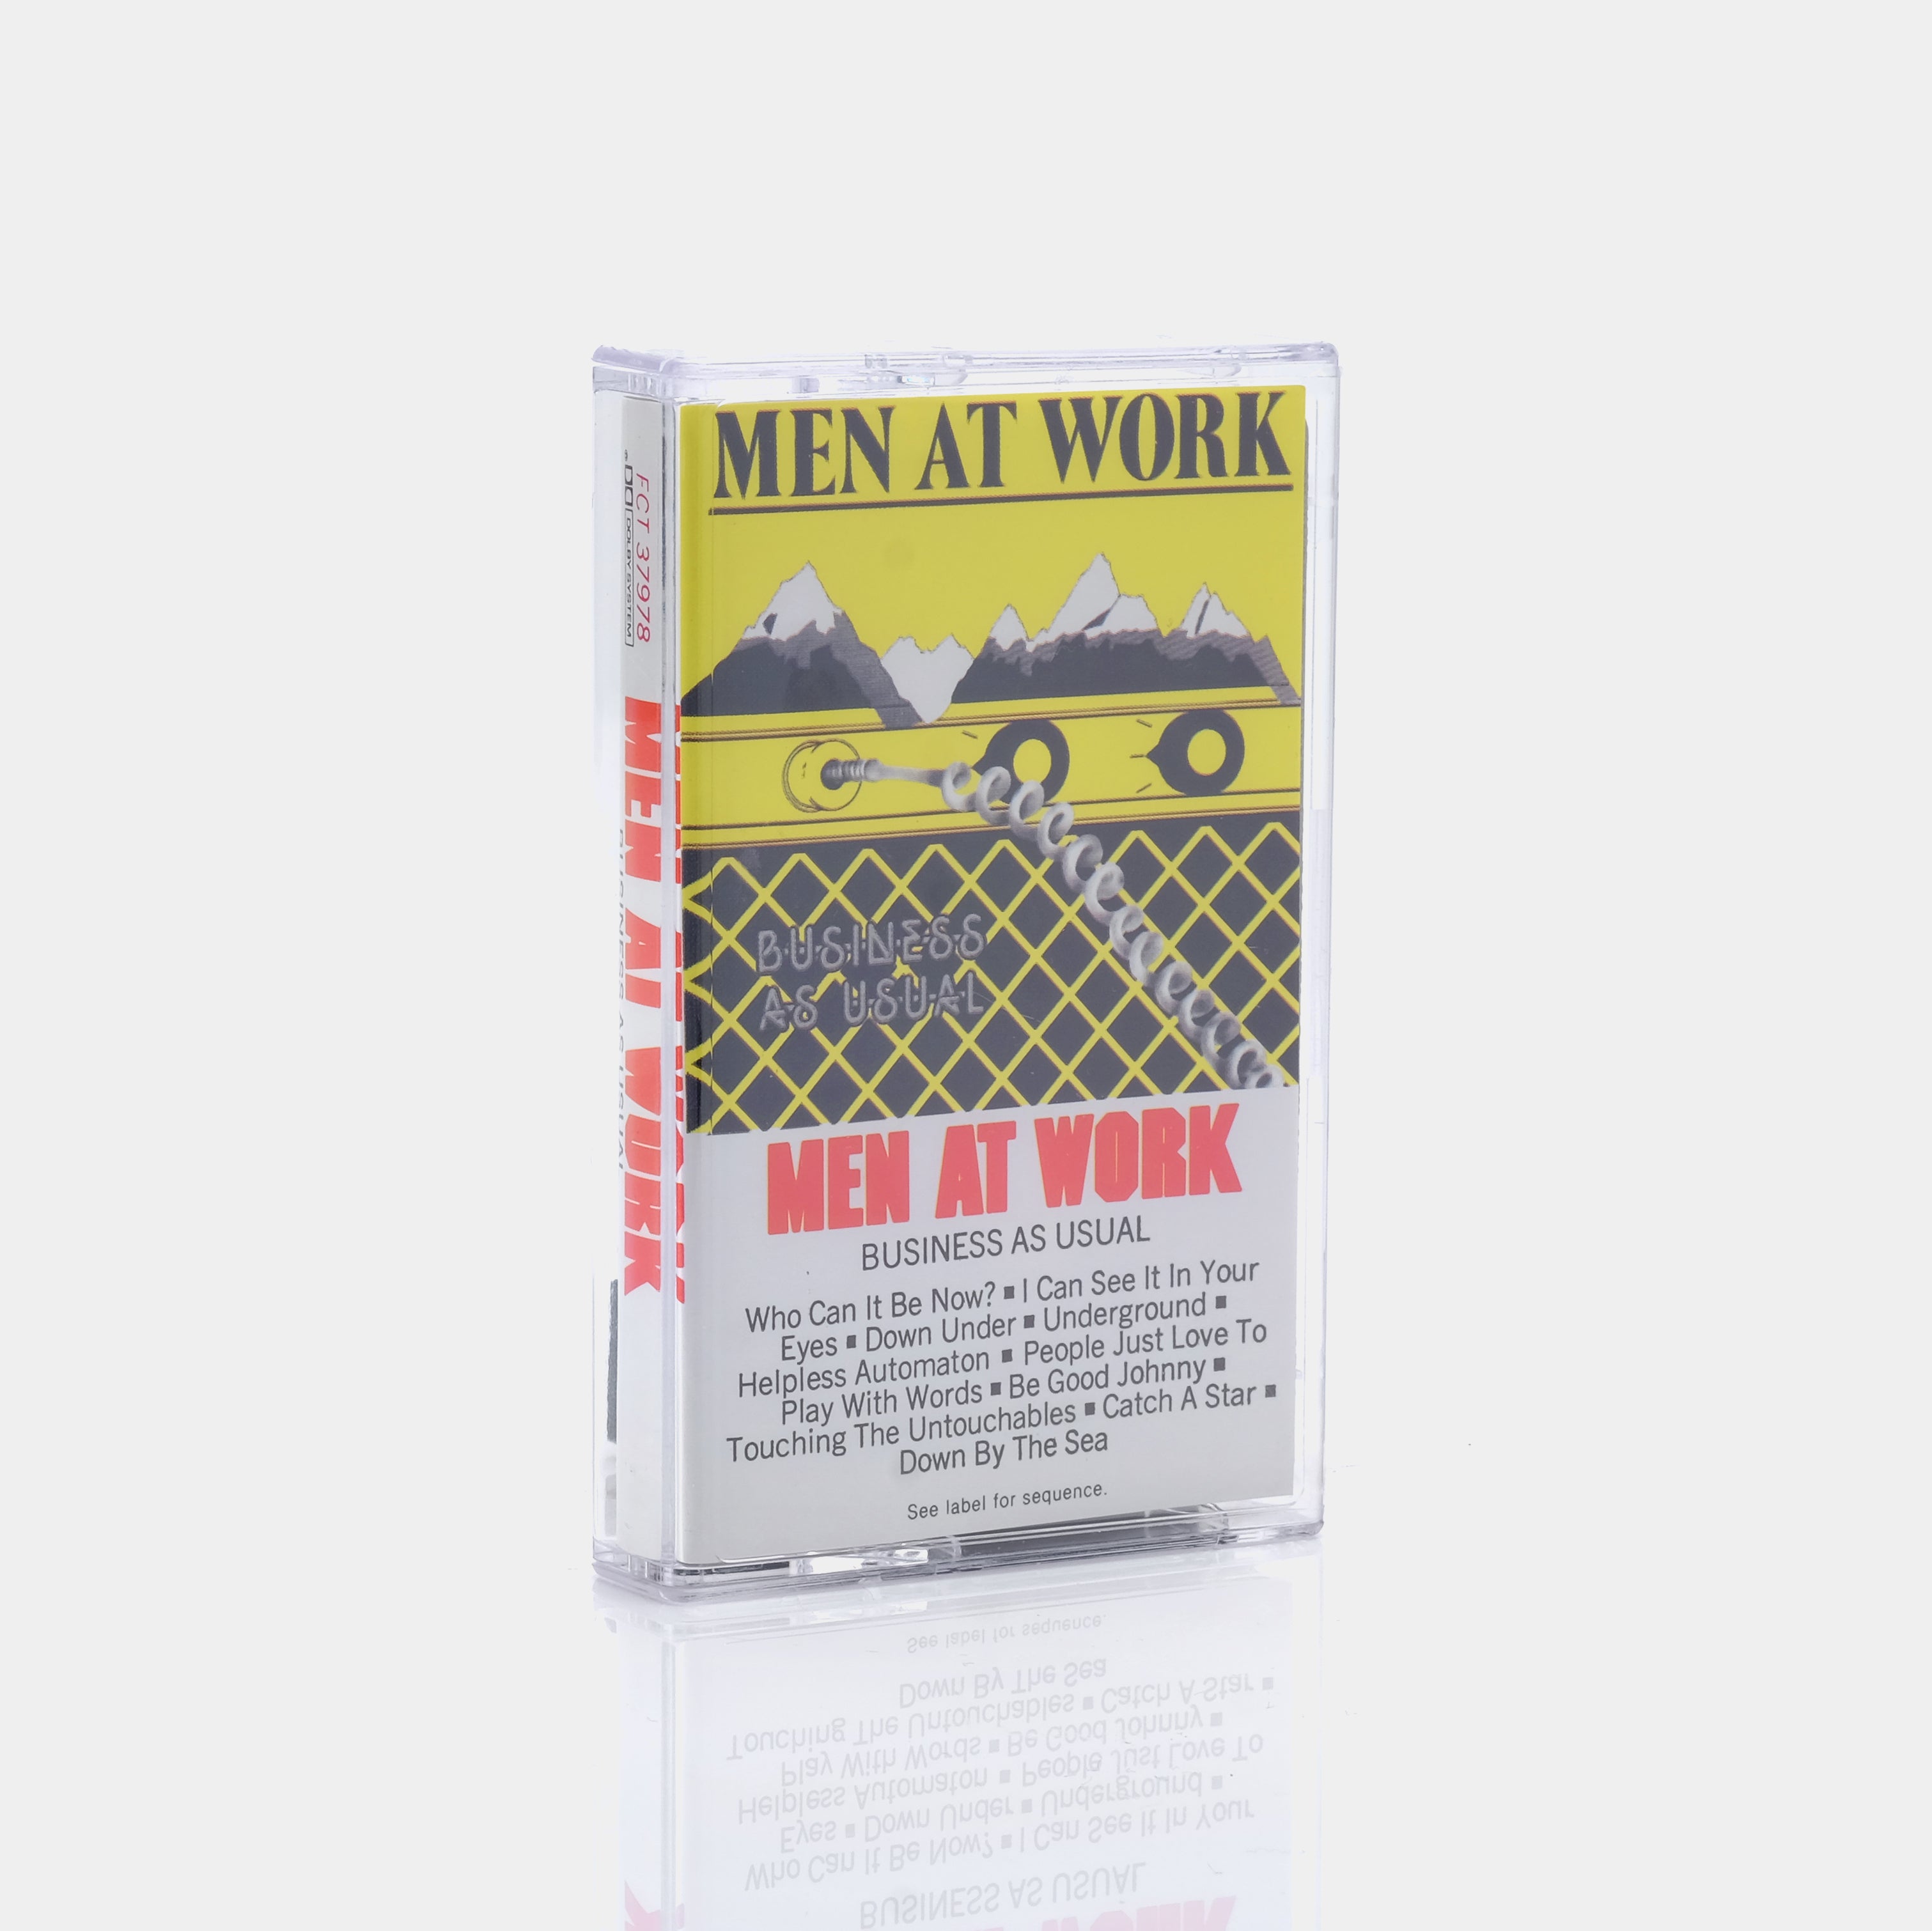 Men At Work - Business As Usual Cassette Tape